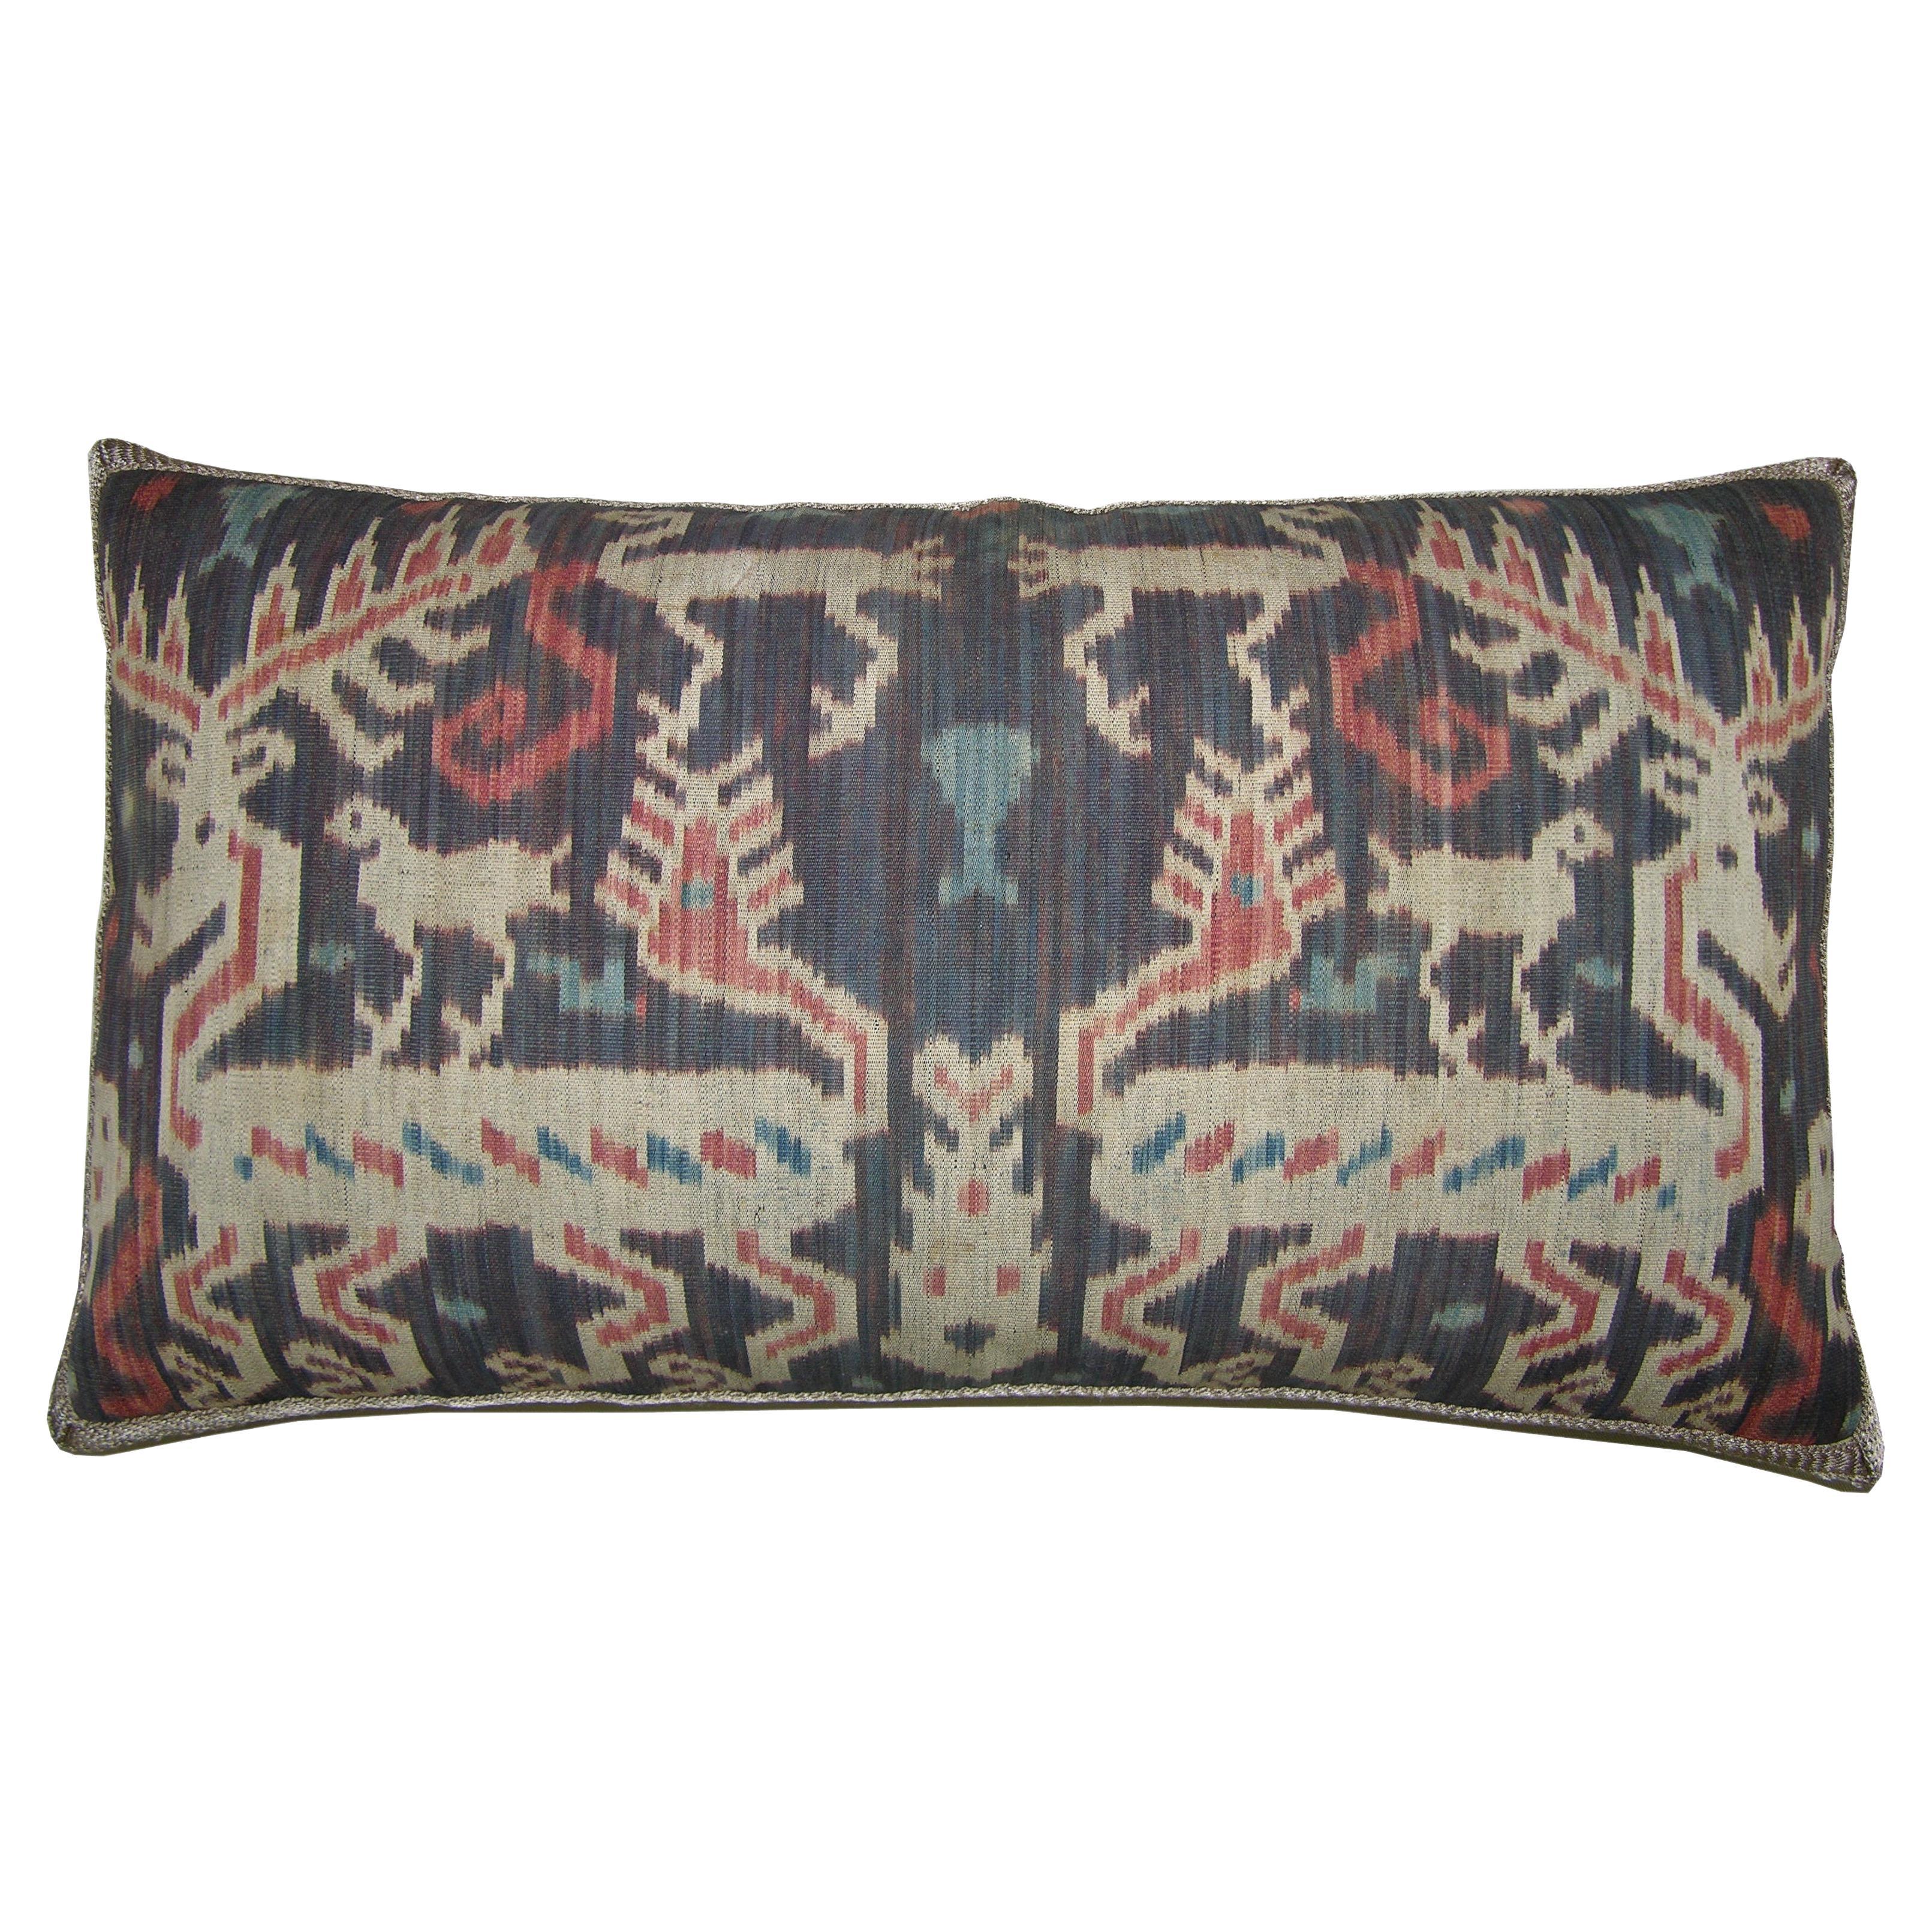 Circa 1850 Antique Ikat Tapestry Pillow For Sale